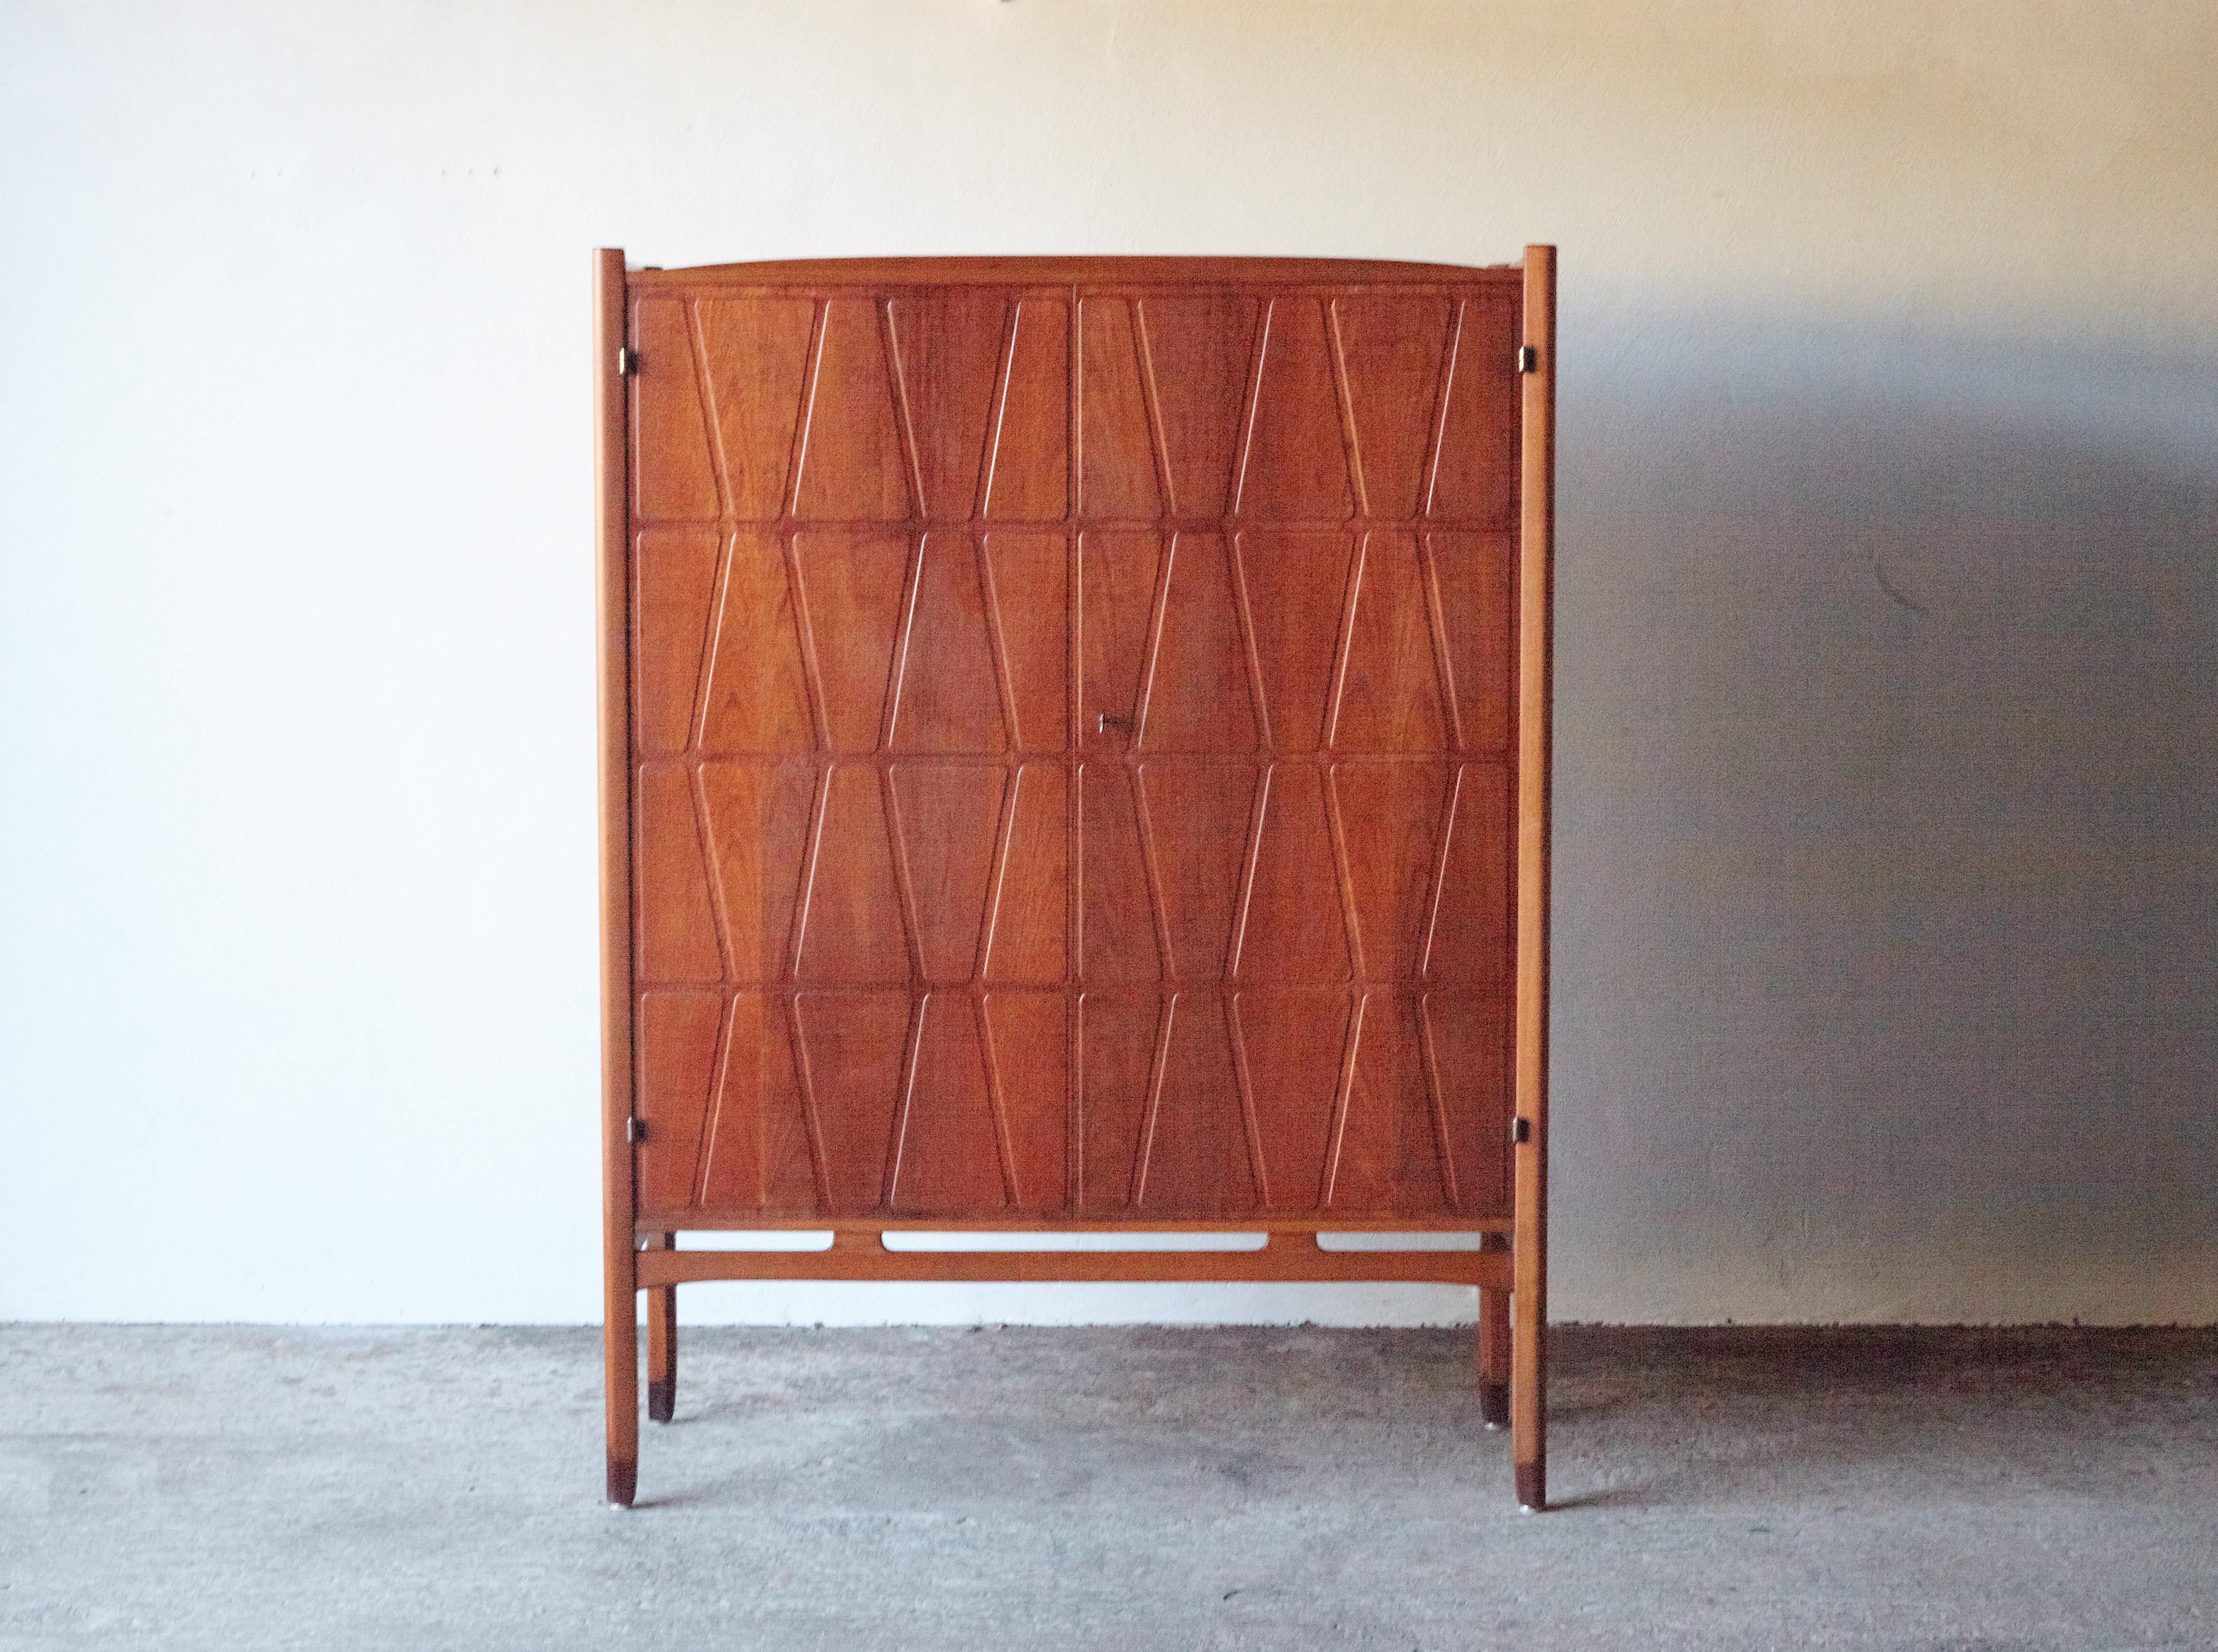 A wonderful Bangkok cabinet designed by Yngve Ekström for Westbergs Mobler, Sweden, 1950s. Solid beech legs with teak doors and sides. Inside there are three drawers and adjustable shelves. Very good vintage condition with key present.